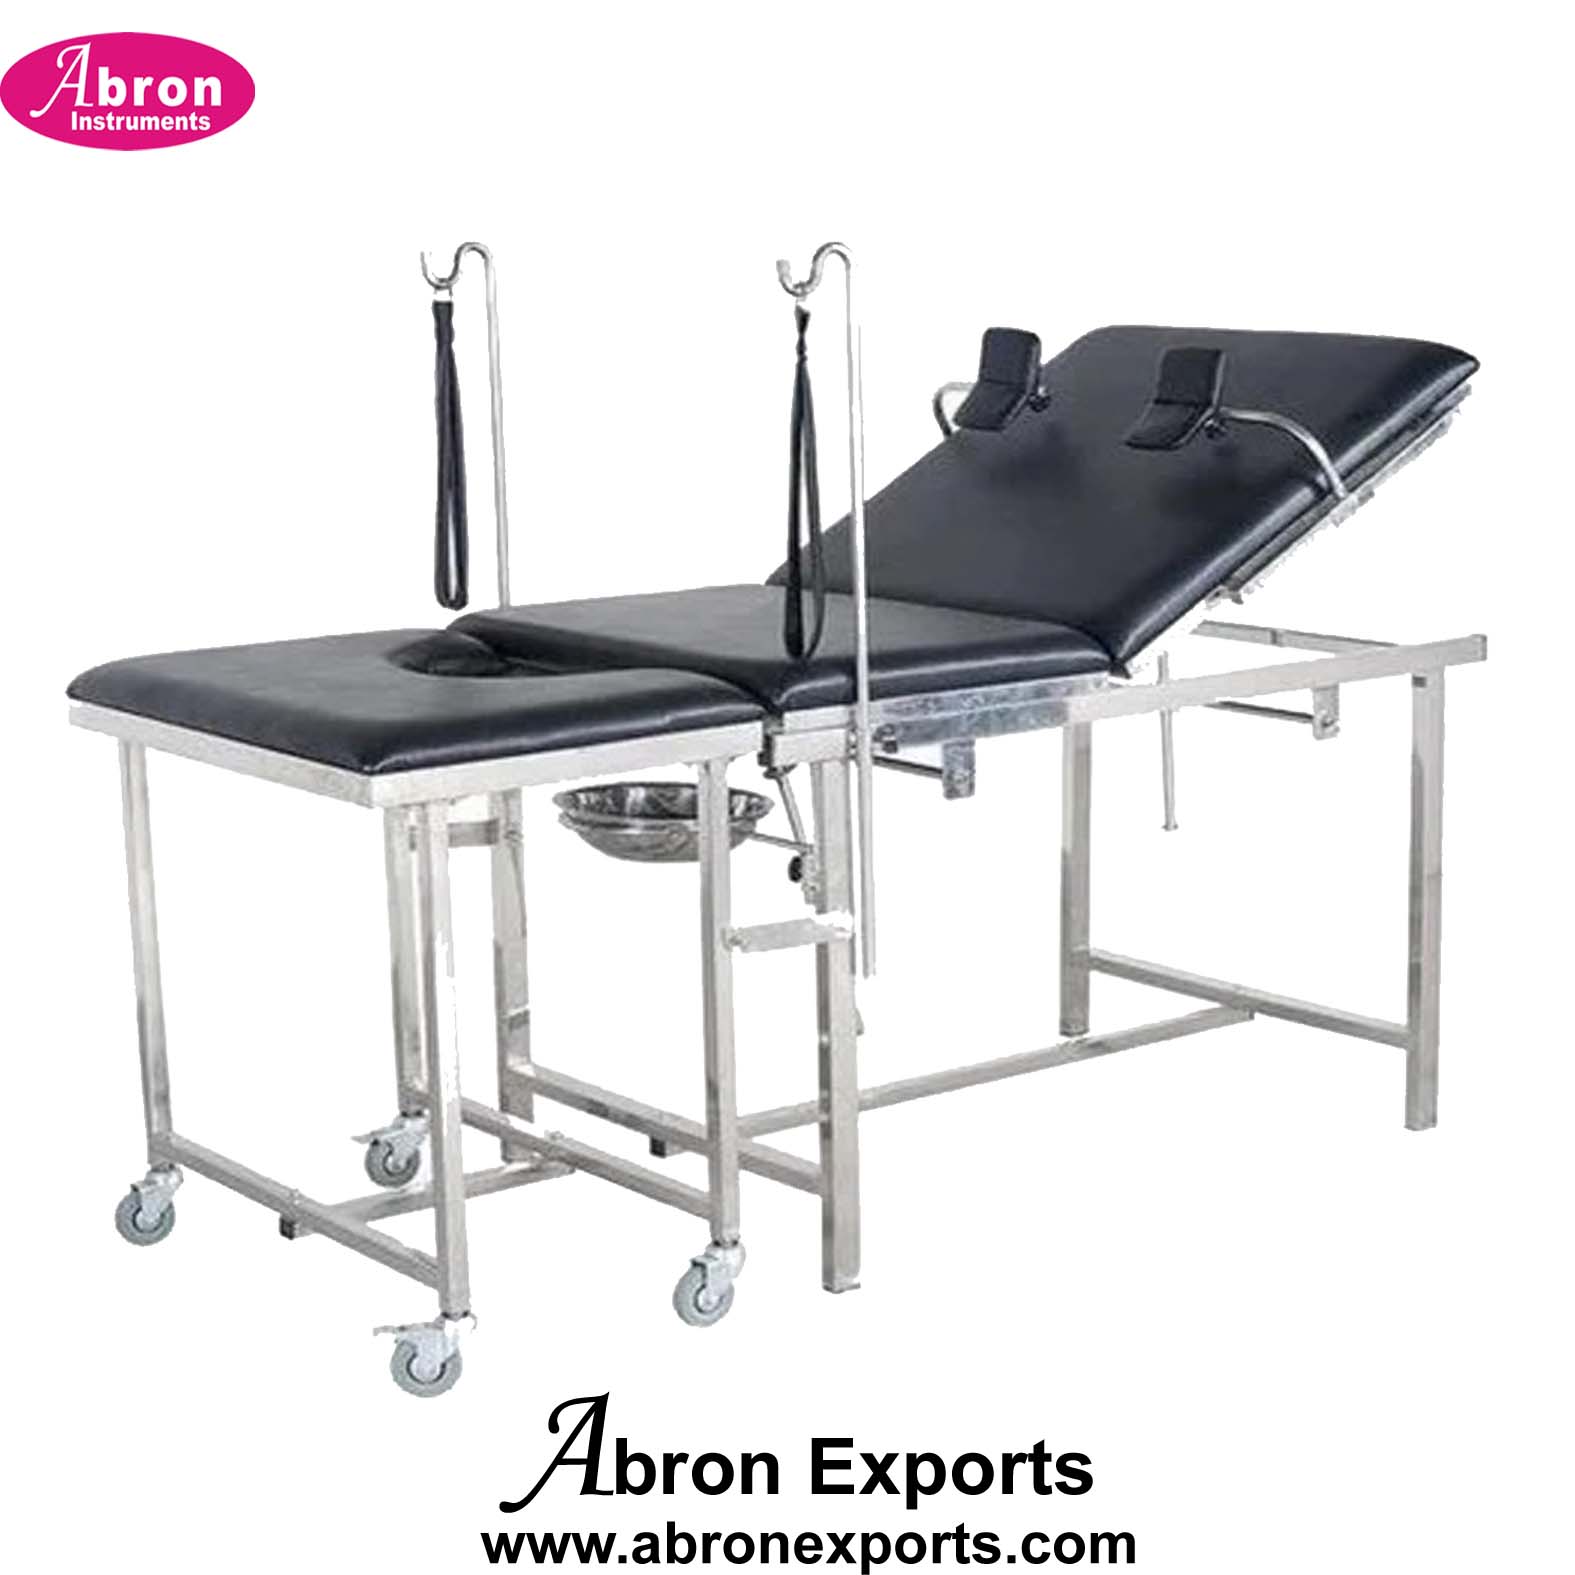 Gynecological Obstetric Delivery Examination Table Bed Labour with Bawl Two Sections Legs Wheels Matters Abron ABM-2714GWB 